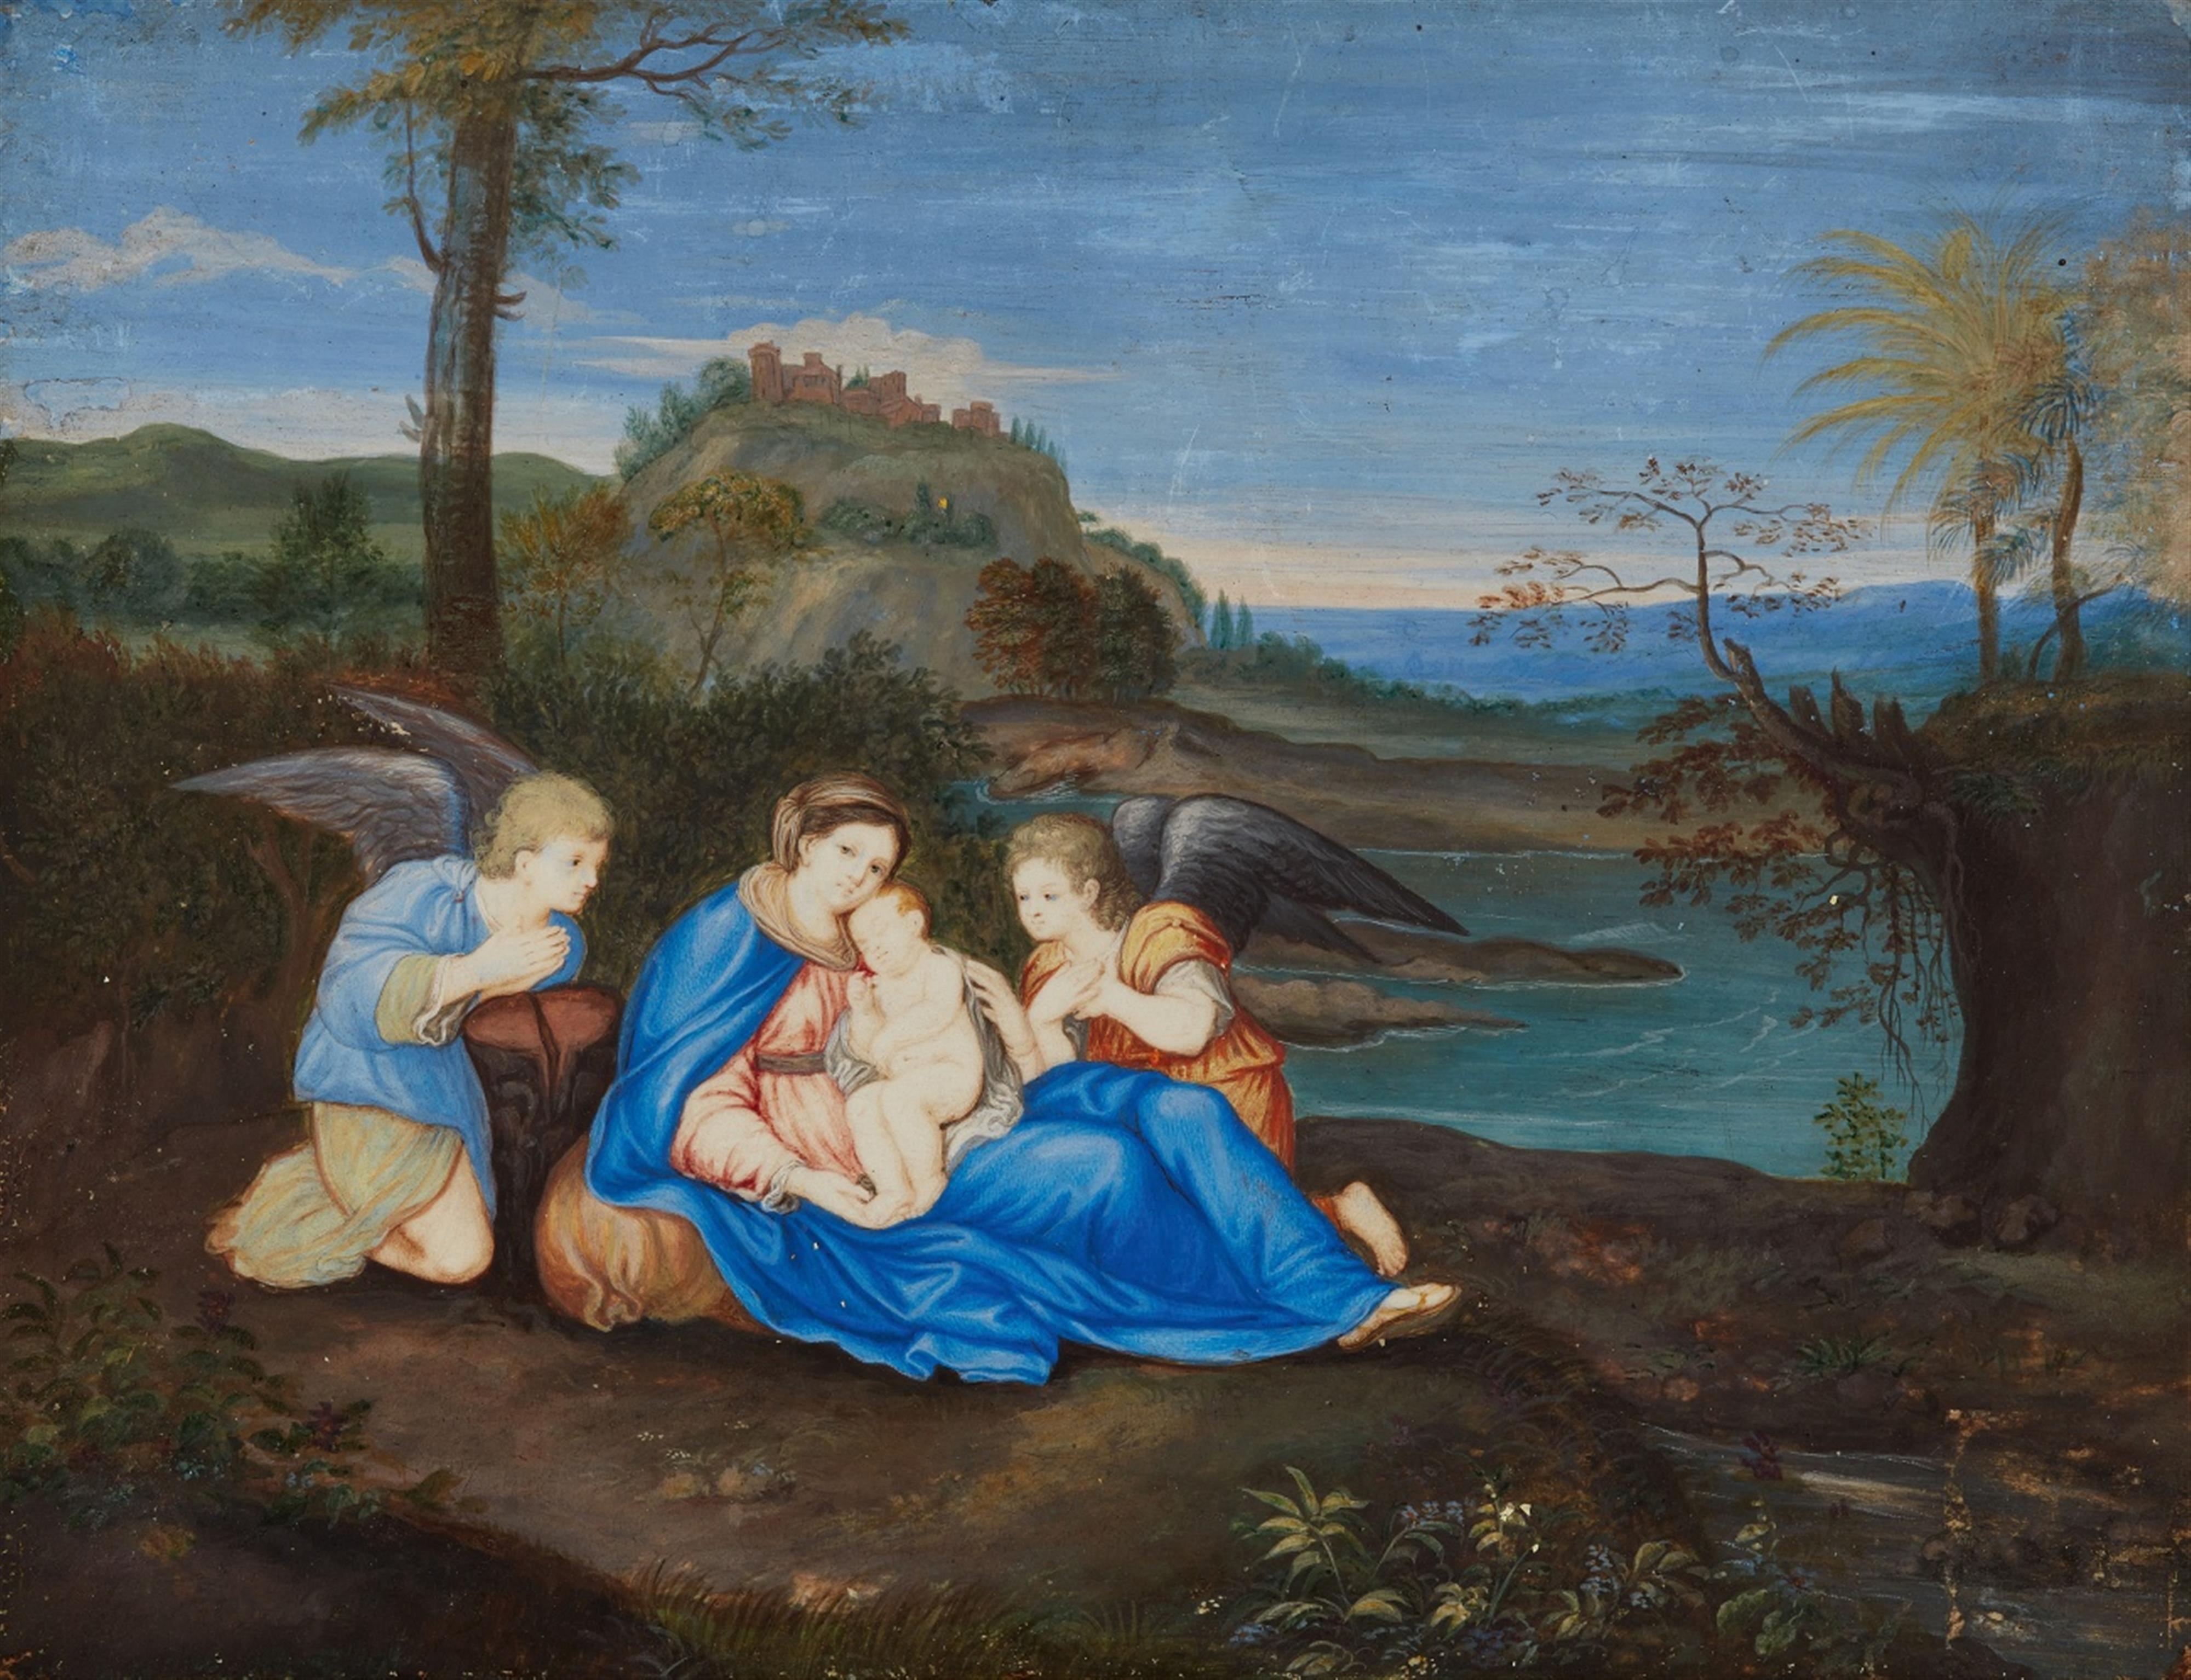 Flemish School circa 1600 - The Virgin and Child with Two Angels in a Landscape - image-1